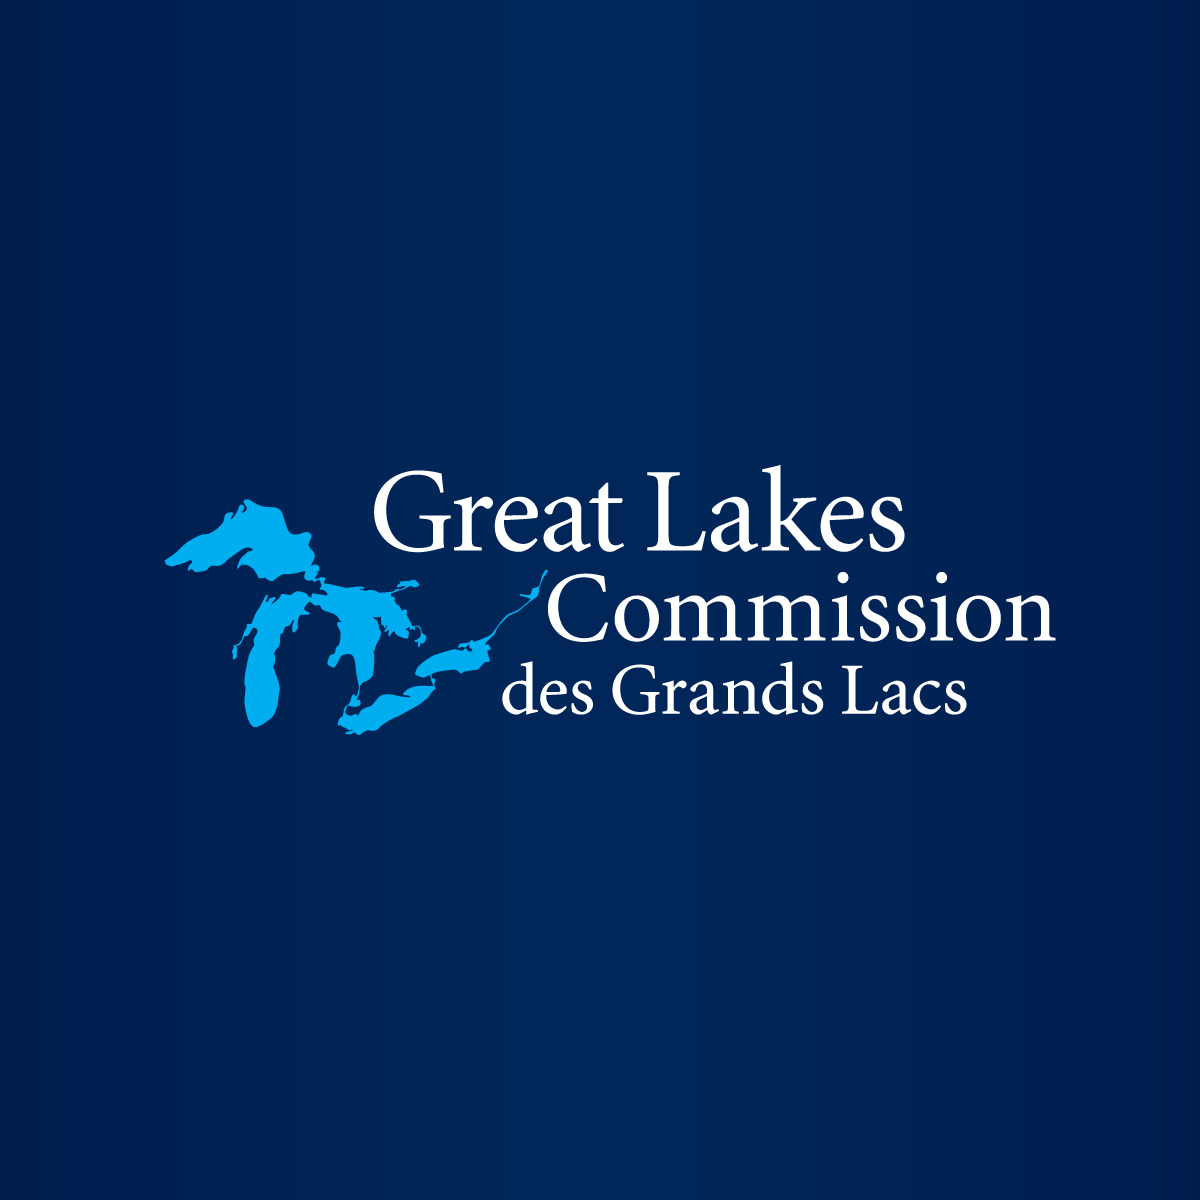 Great Lakes steel production slips by 16,000 tons